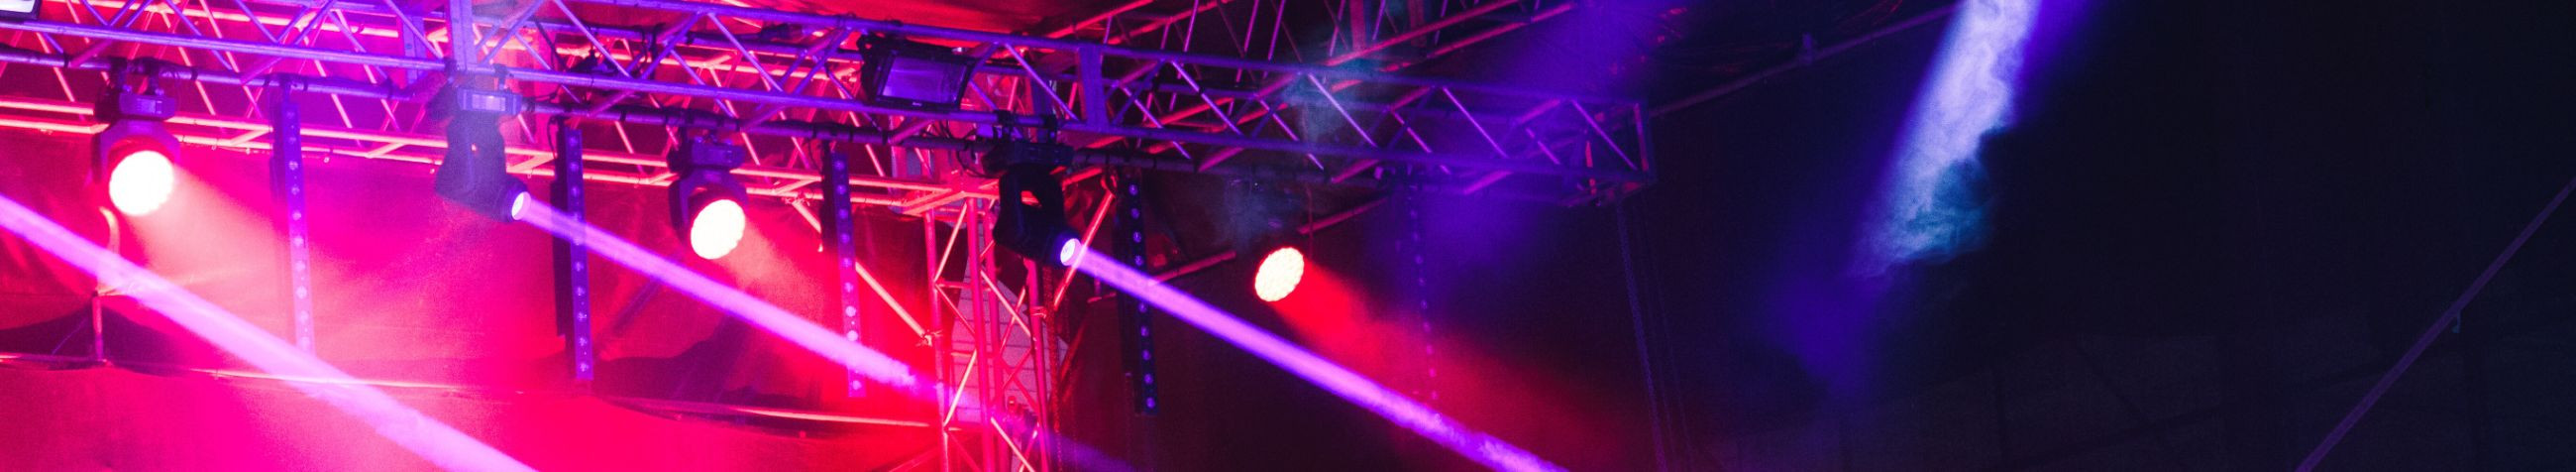 We provide comprehensive sound and lighting solutions for events of all sizes.